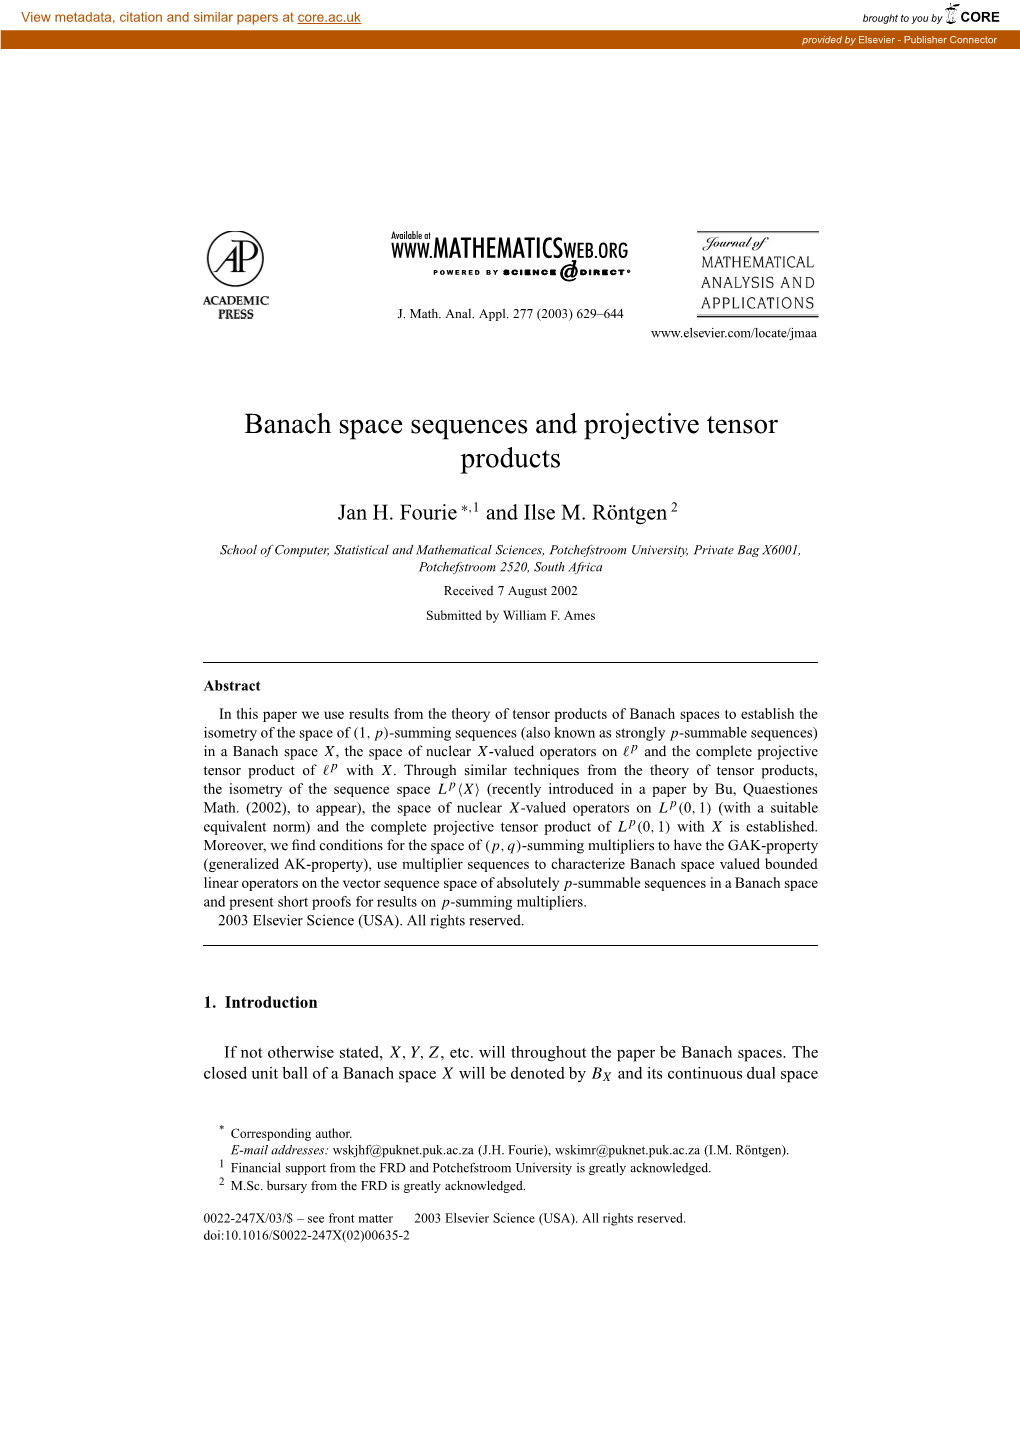 Banach Space Sequences and Projective Tensor Products